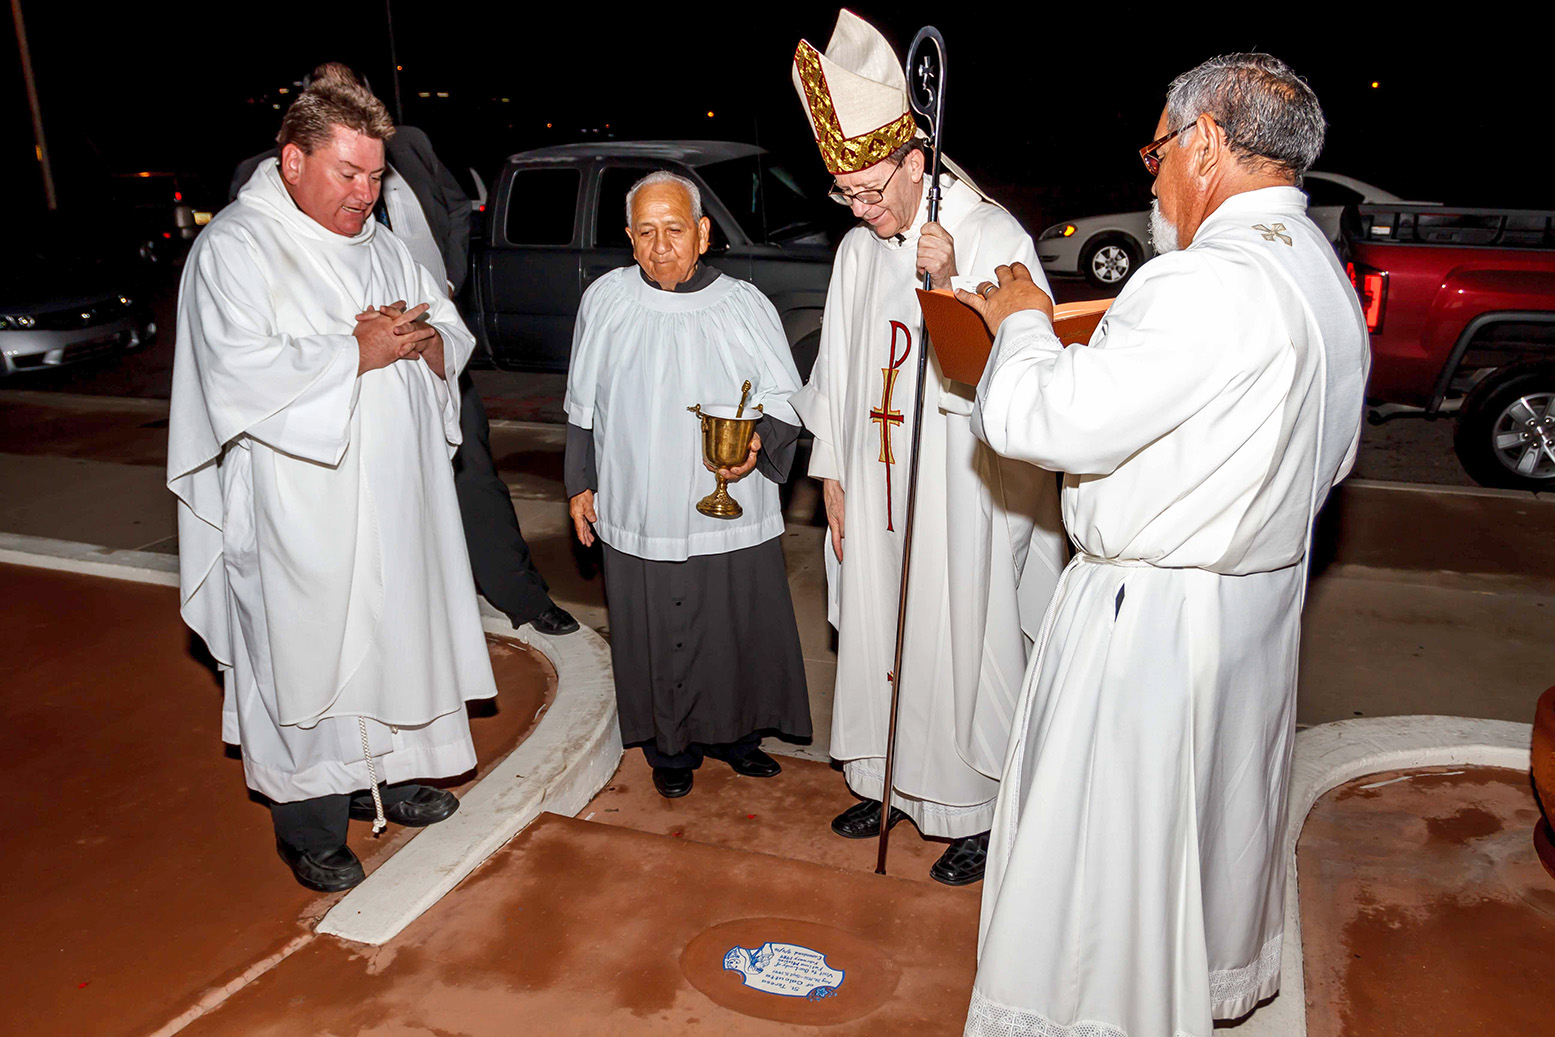 Bishop Thomas J. Olmsted admires a tile marking the spot where Mother Teresa kissed the ground outside Our Lady of Fatima Mission when she got out of her car in 1989. (John Bering/CATHOLIC SUN)